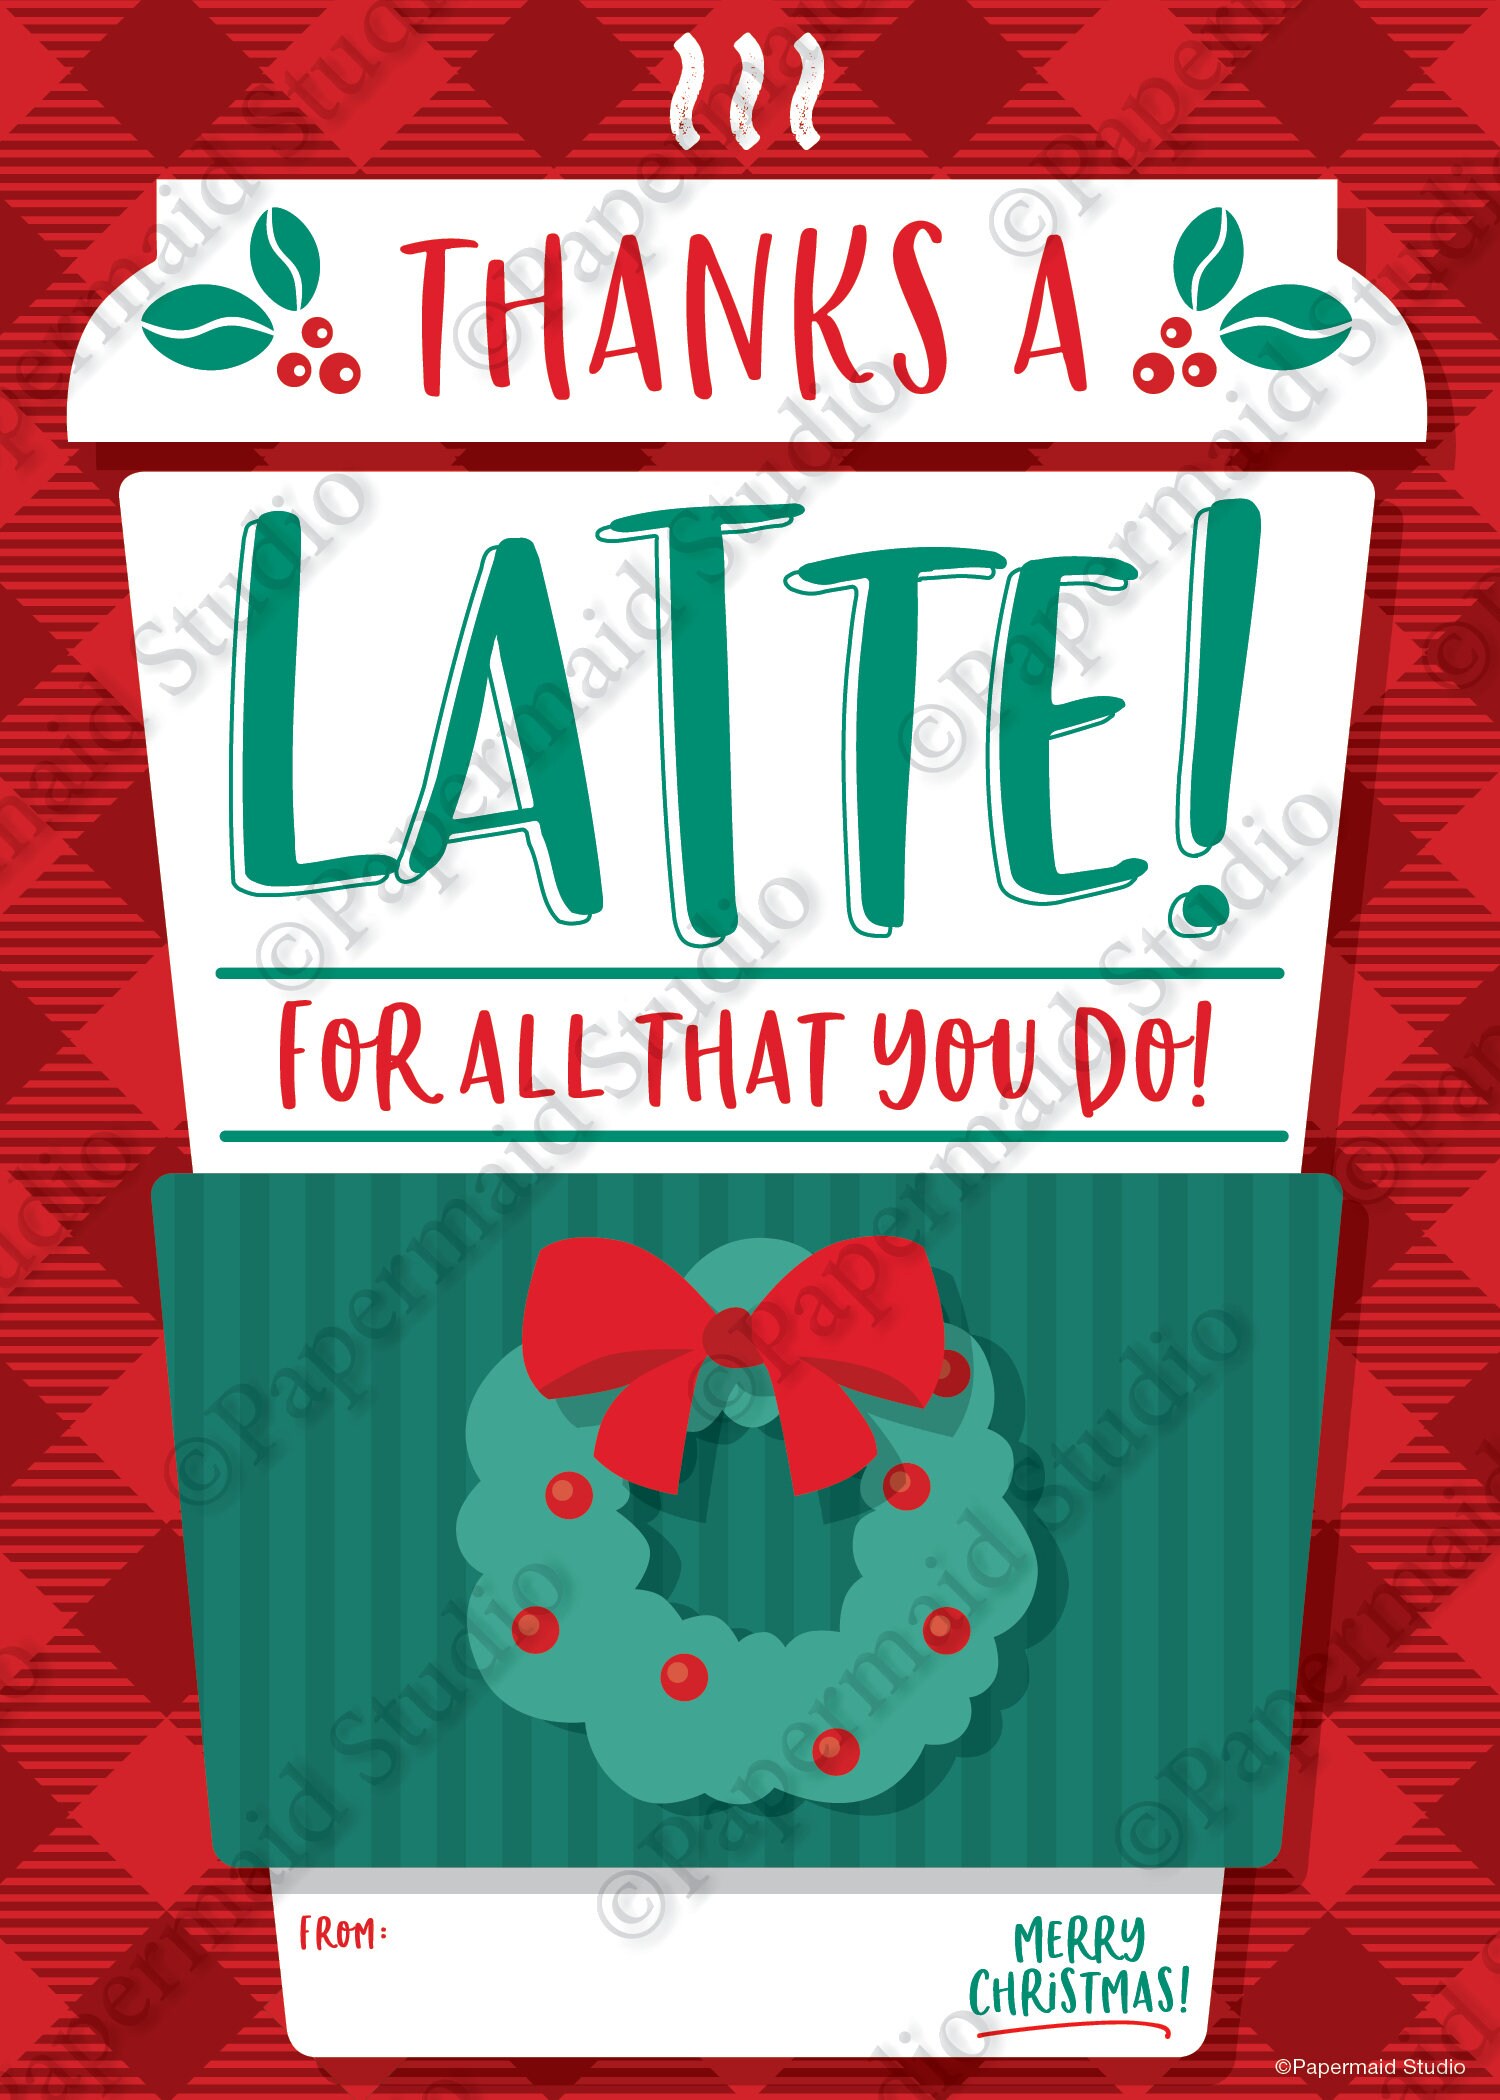 Gold Christmas Thanks a Latte Christmas Coffee Gift Card Holder templa –  Cute Party Dash